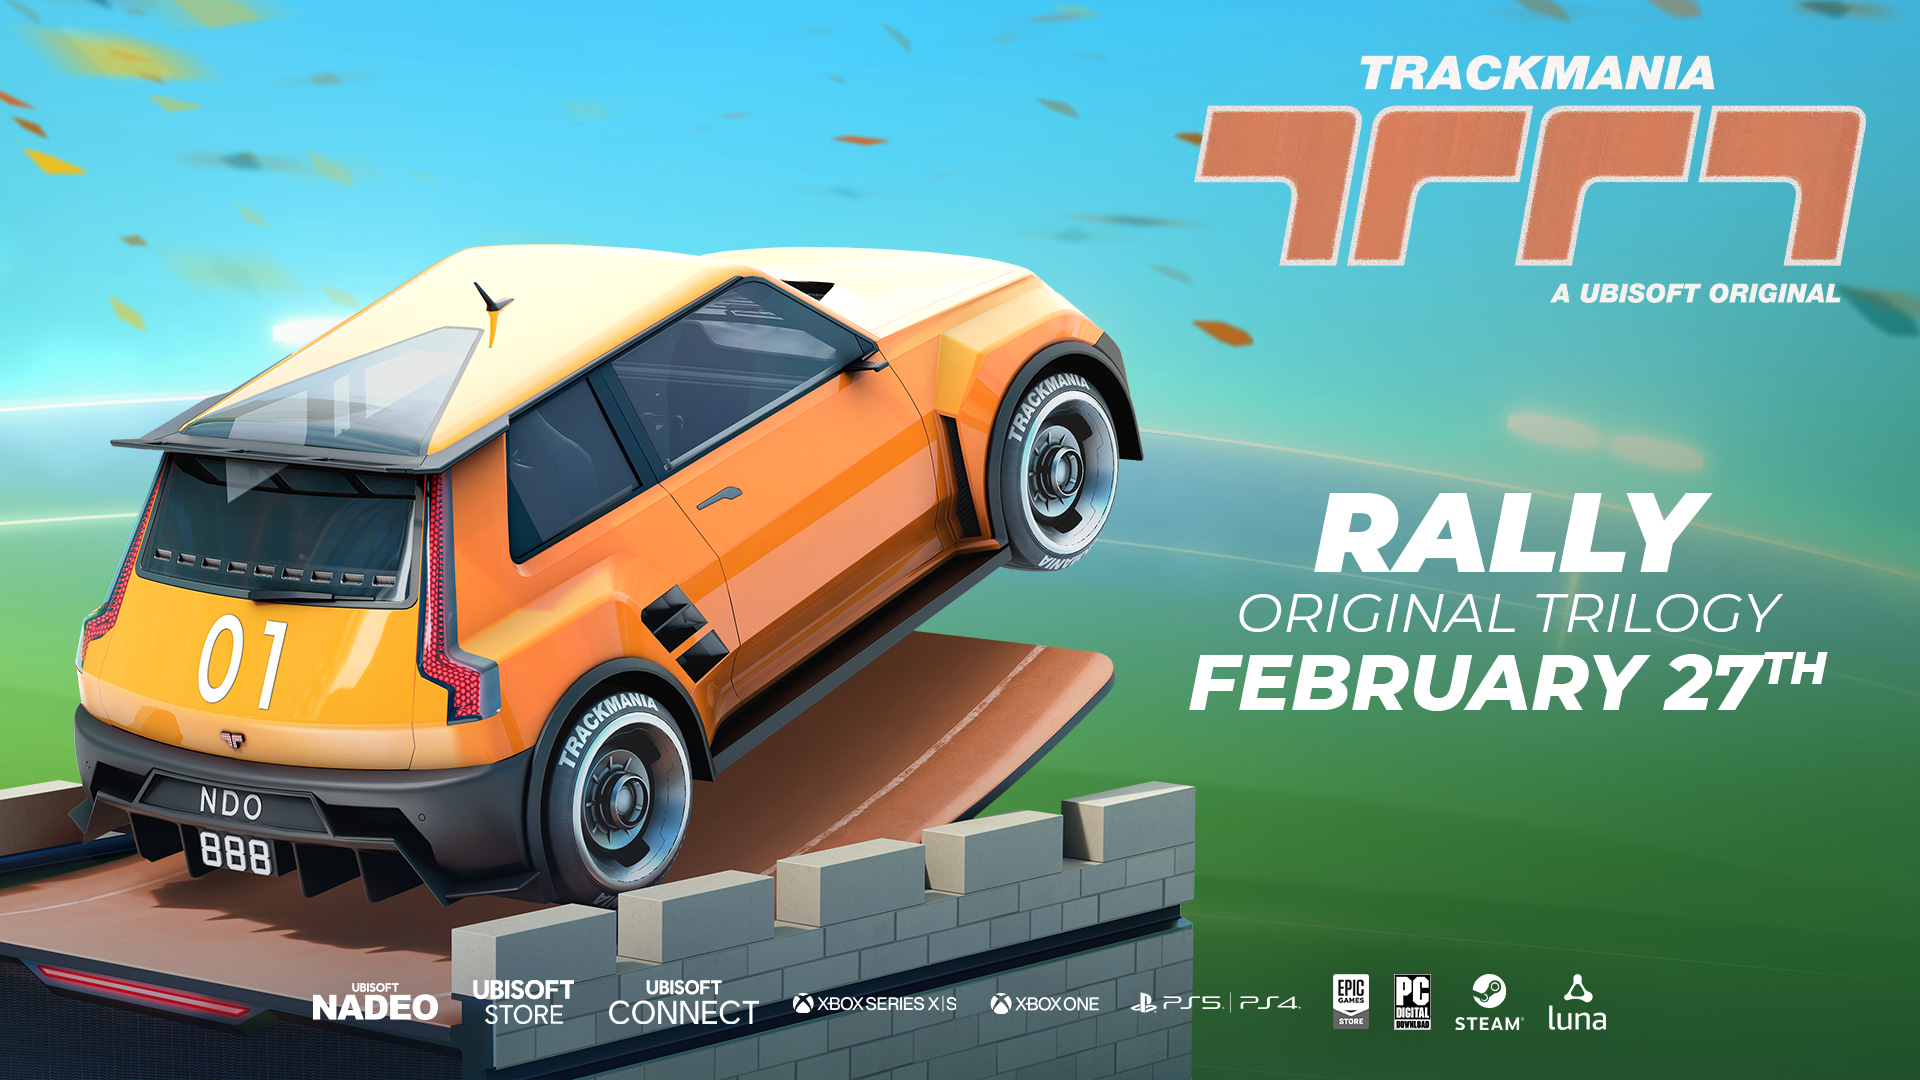 THE RALLY CAR IS ARRIVING IN TRACKMANIA ON FEBRUARY 27TH!